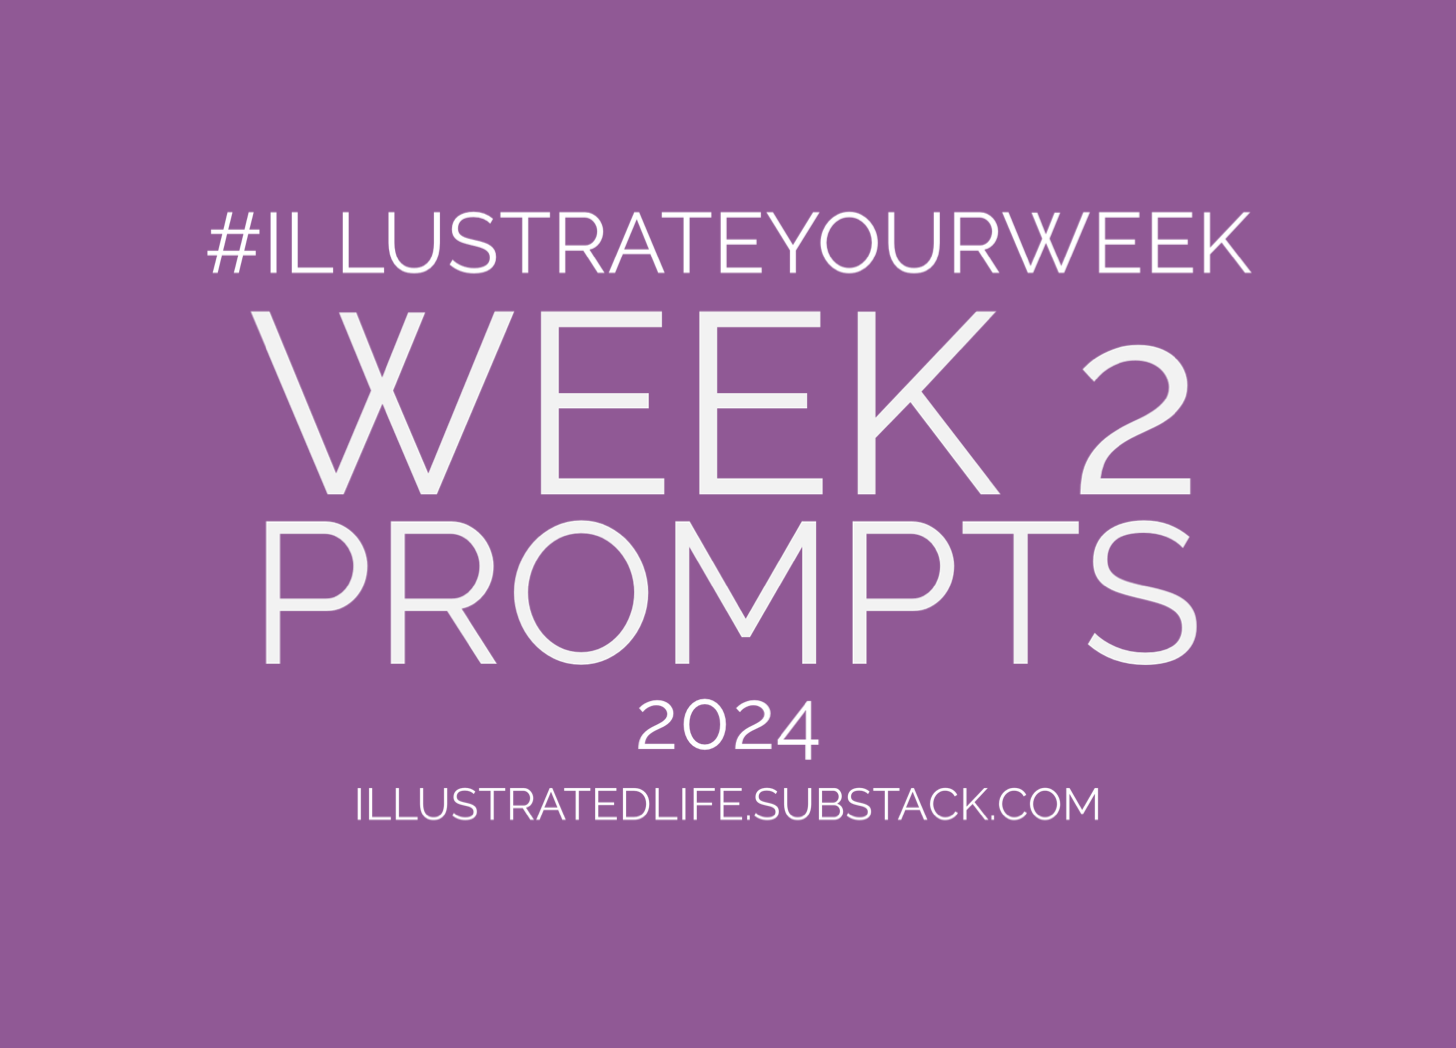 Week 2 Prompts for Illustrate Your Week 2024